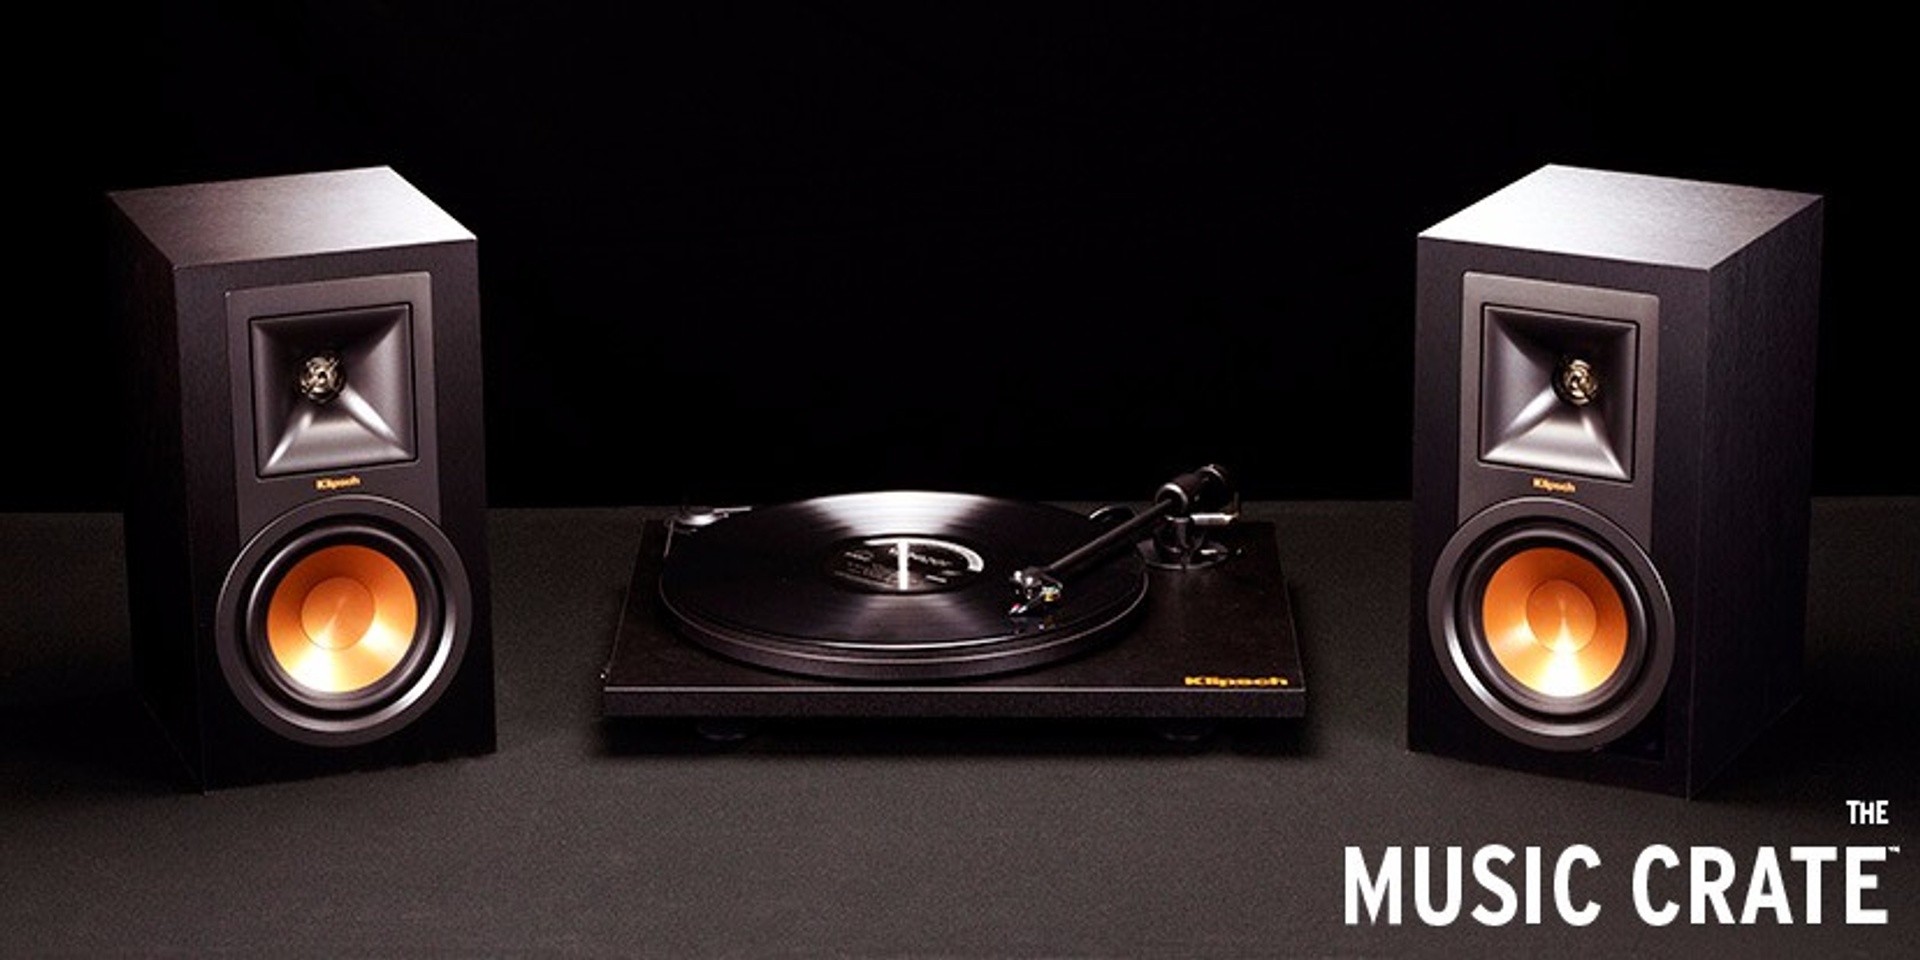 Klipsch solves vinyl woes with all-in-one audiophile system